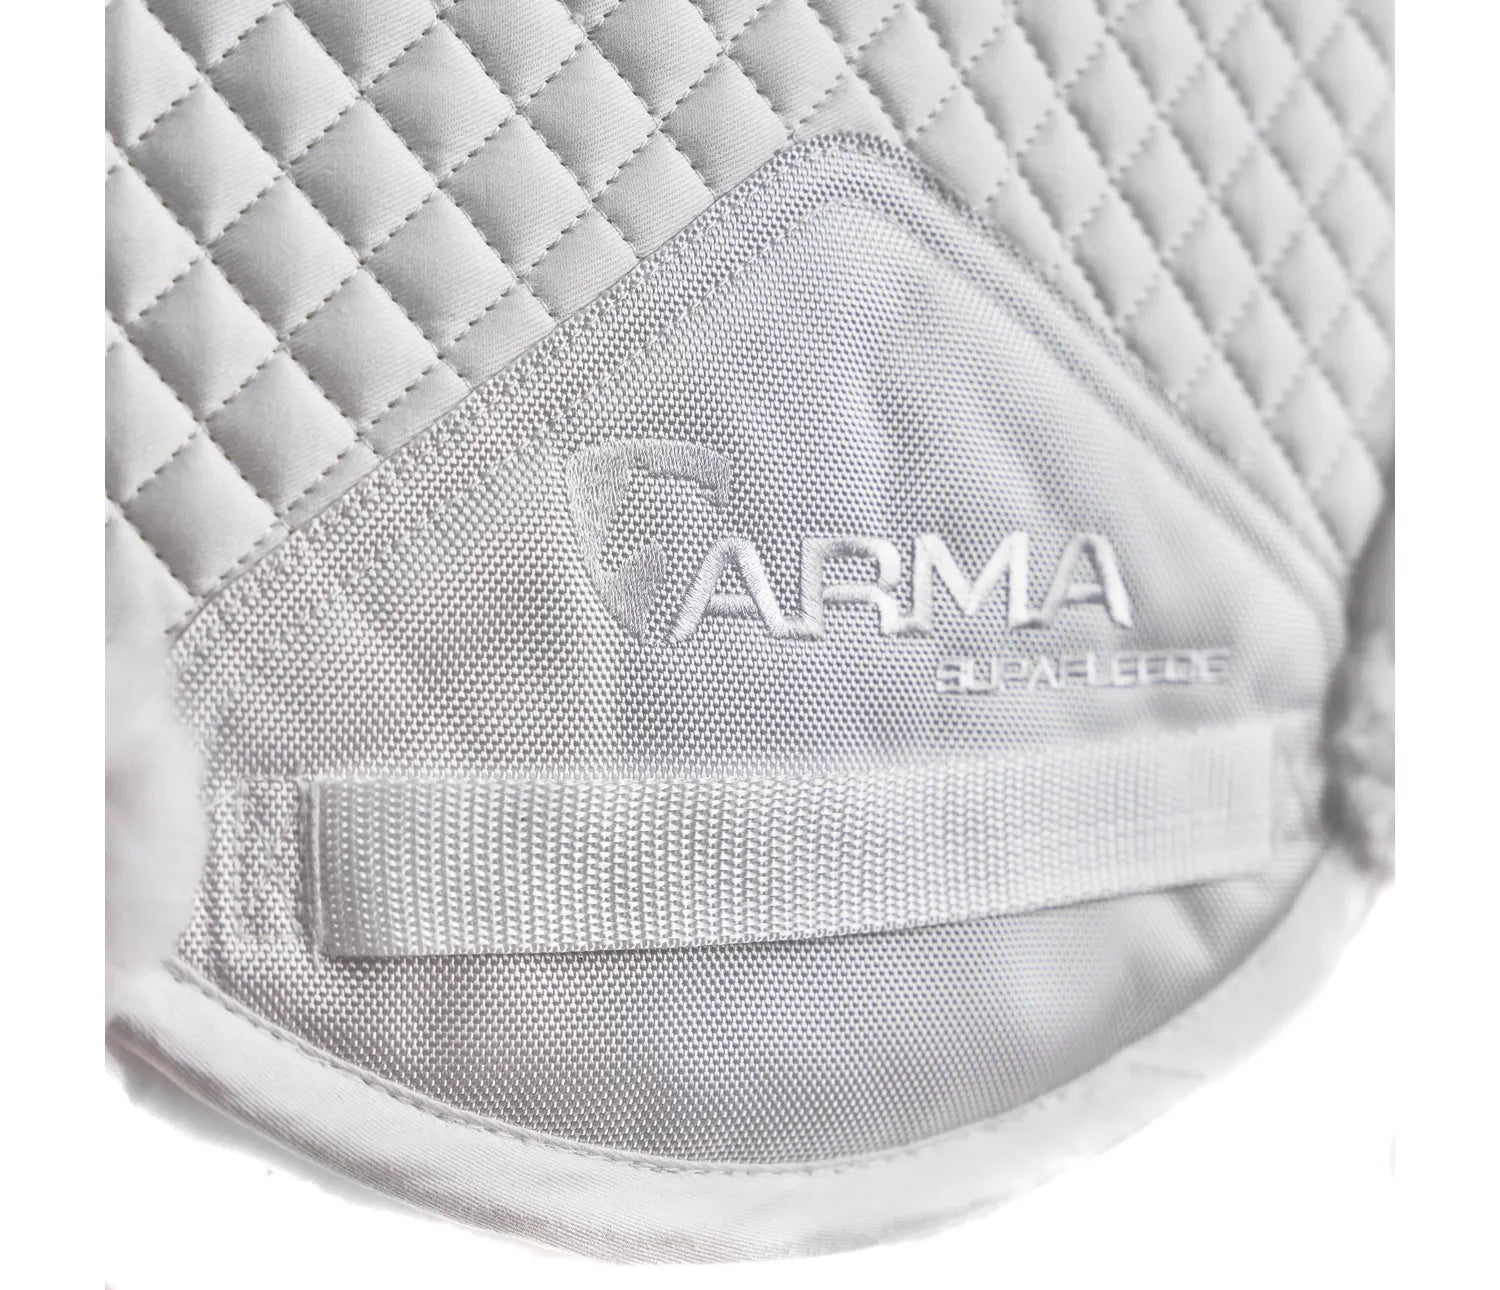 Shires ARMA Supafleece Fully Lined Shaped Pad